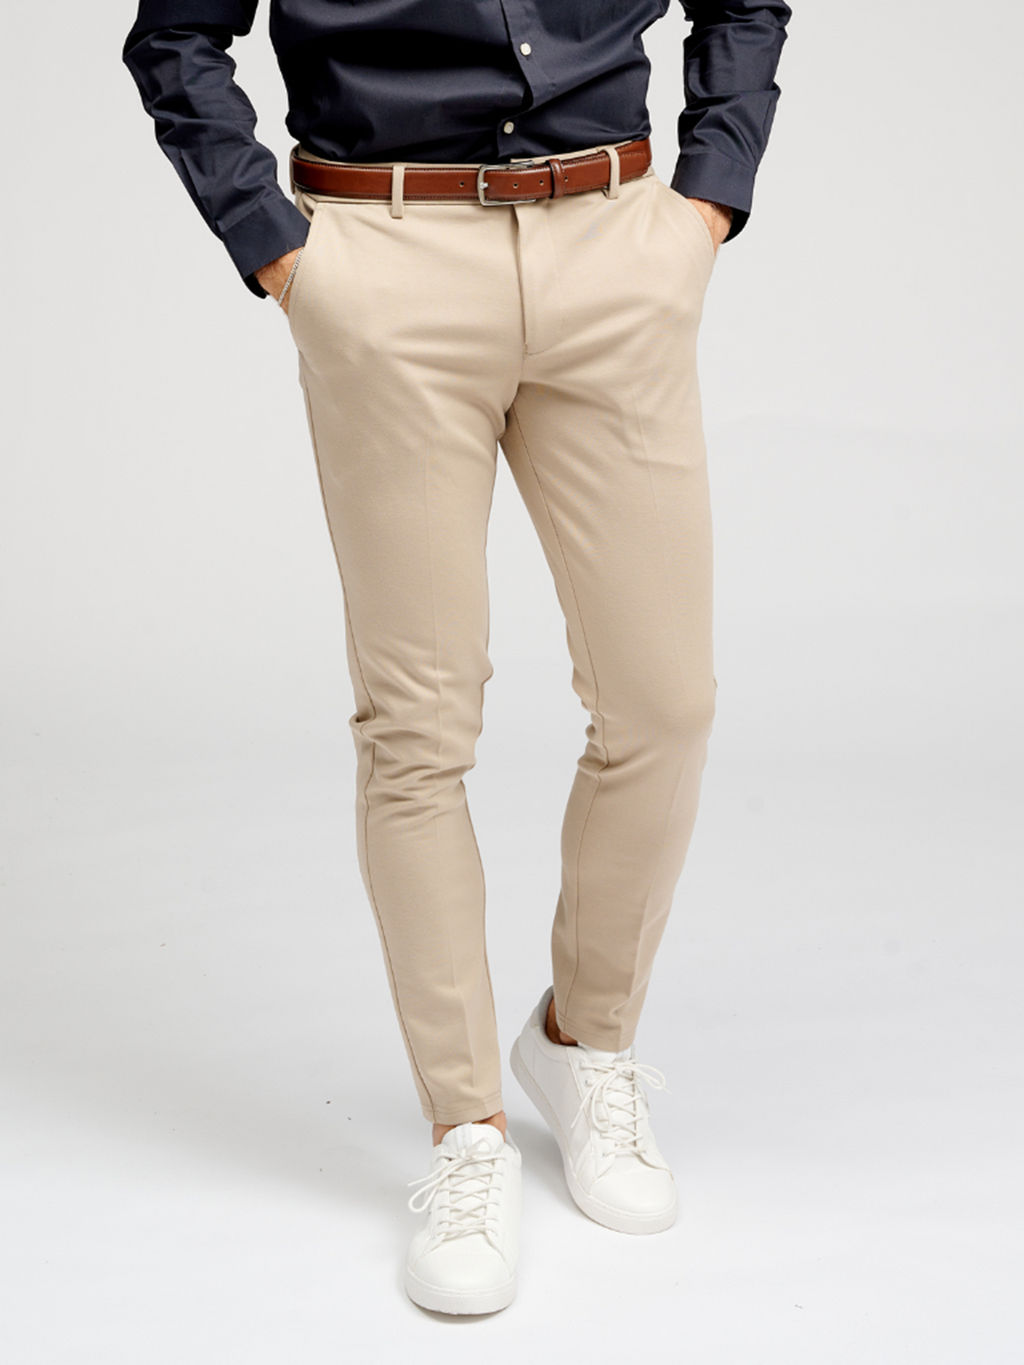 Performance Trousers - Beige